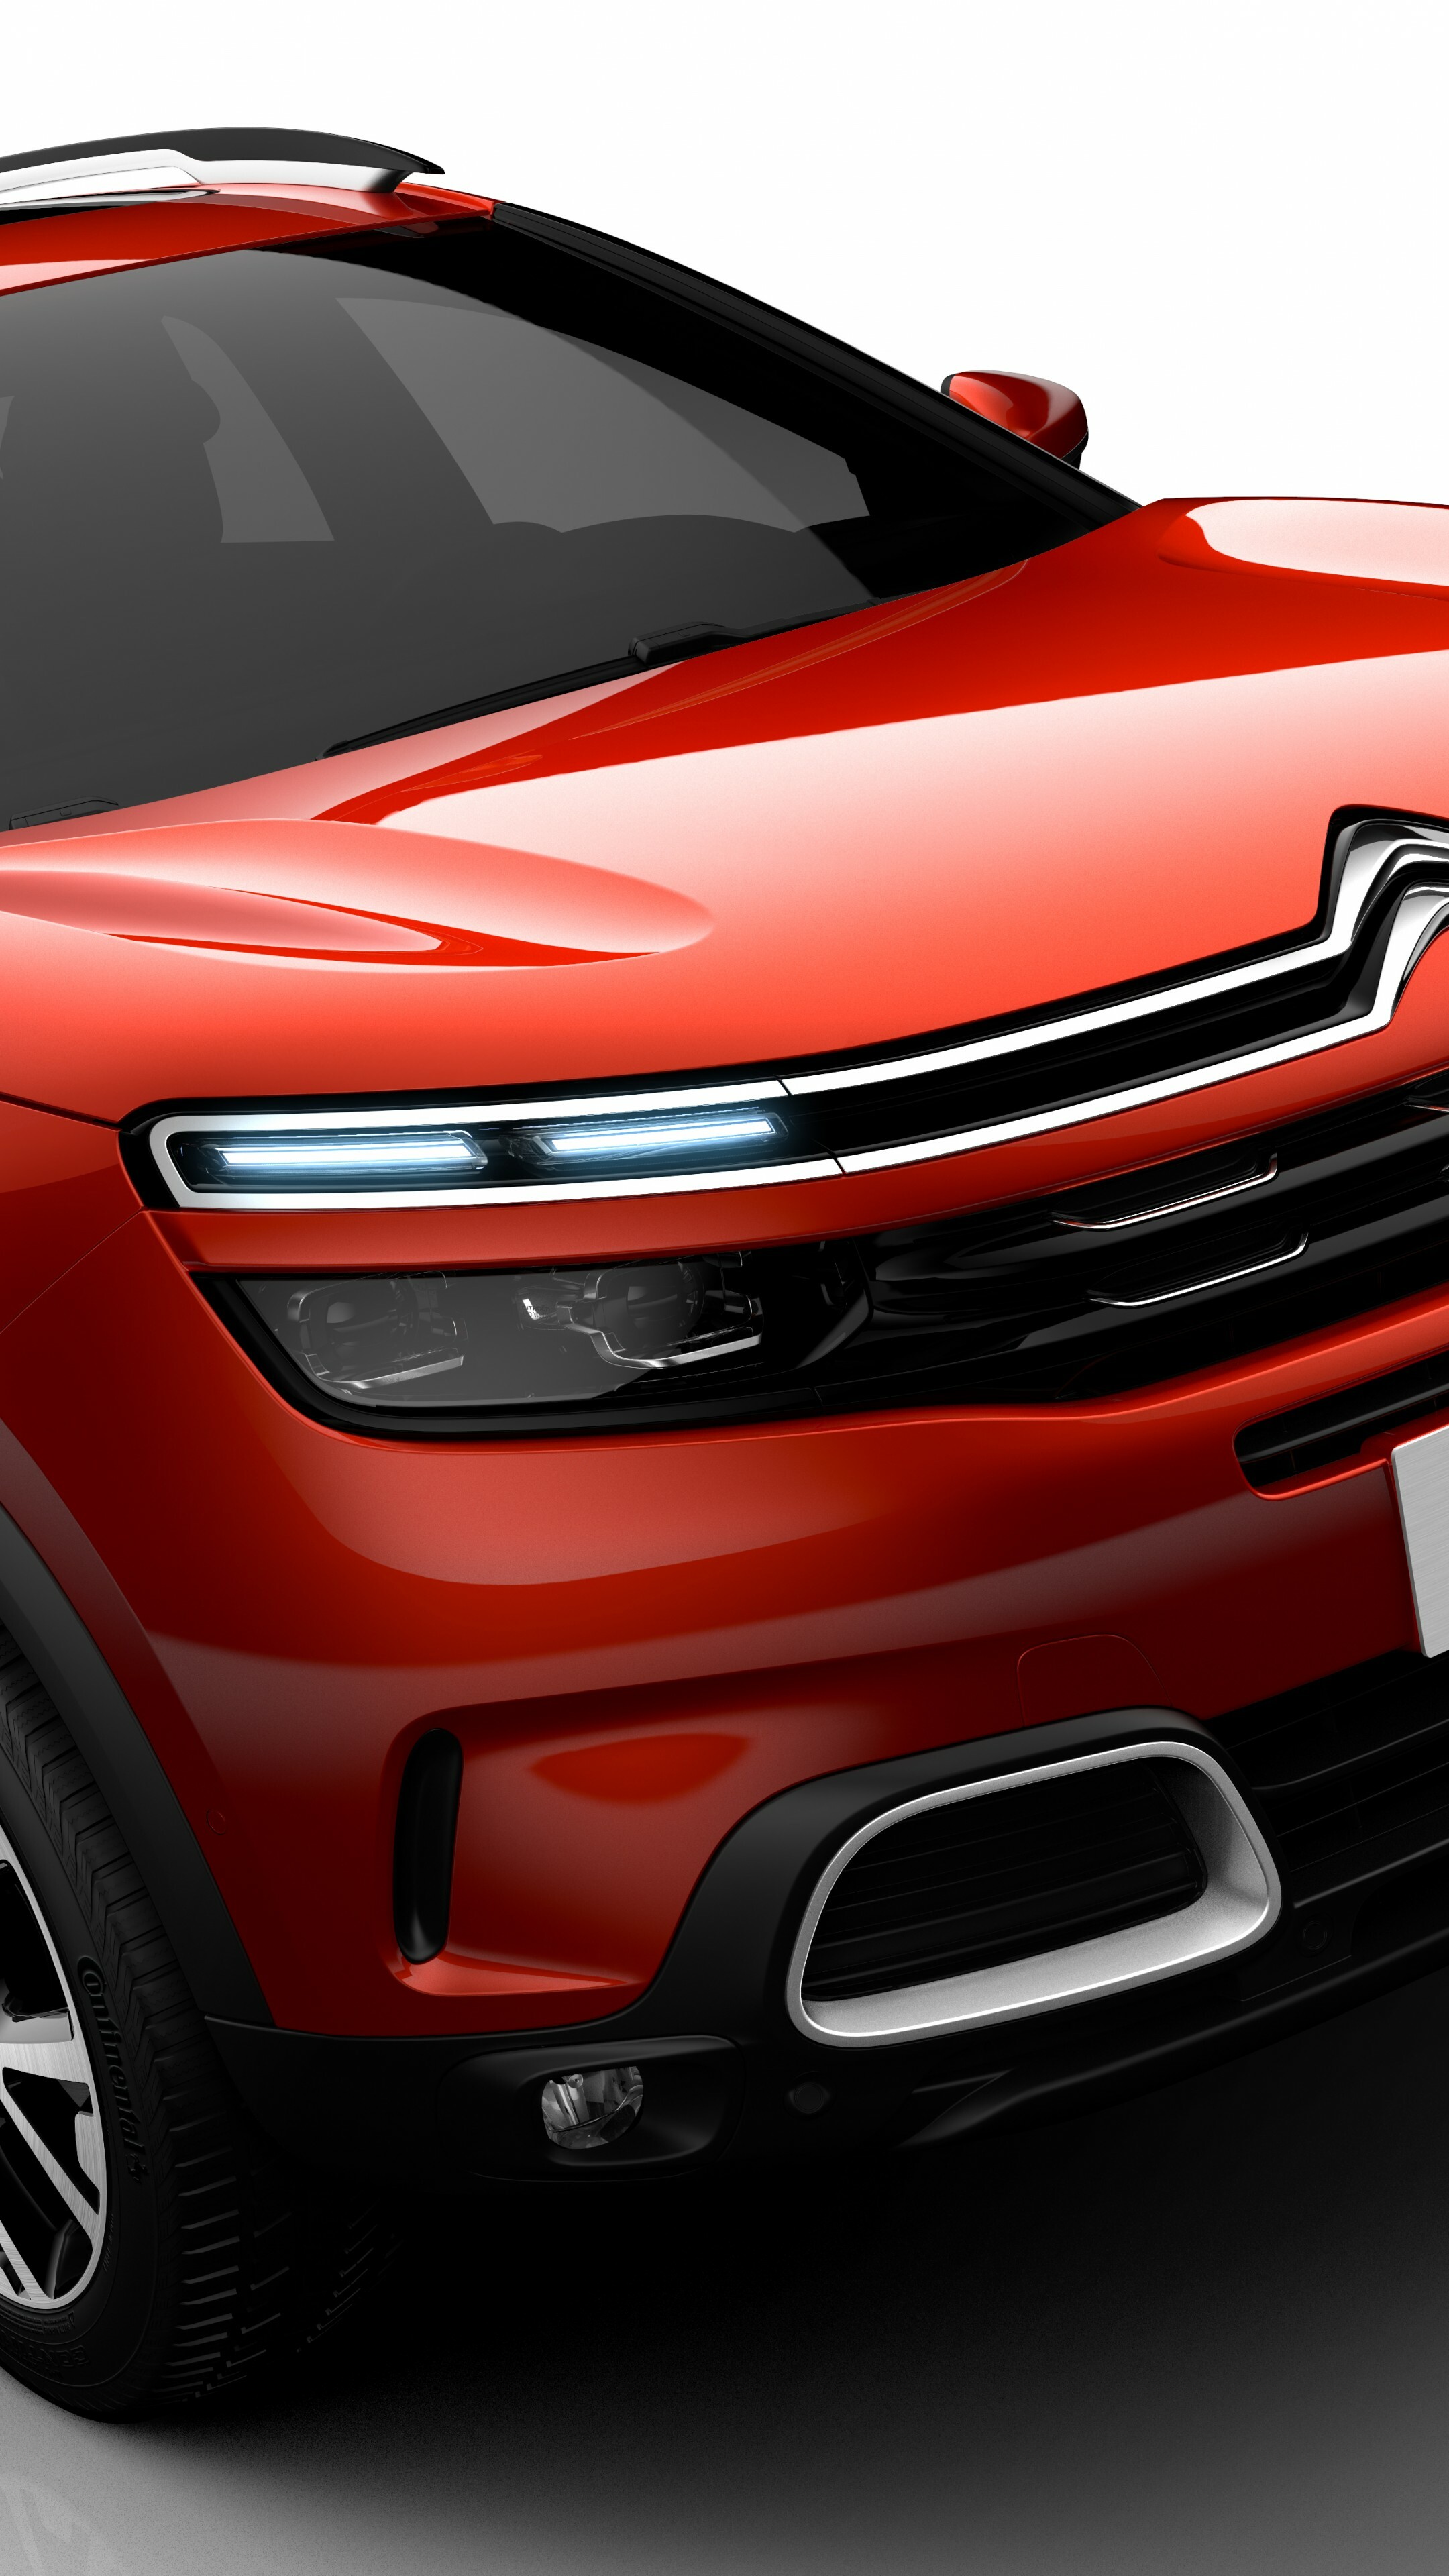 Citroen: Model C5 Aircross, 2019 Cars, SUV, Company, founded on March 1919. 2160x3840 4K Background.